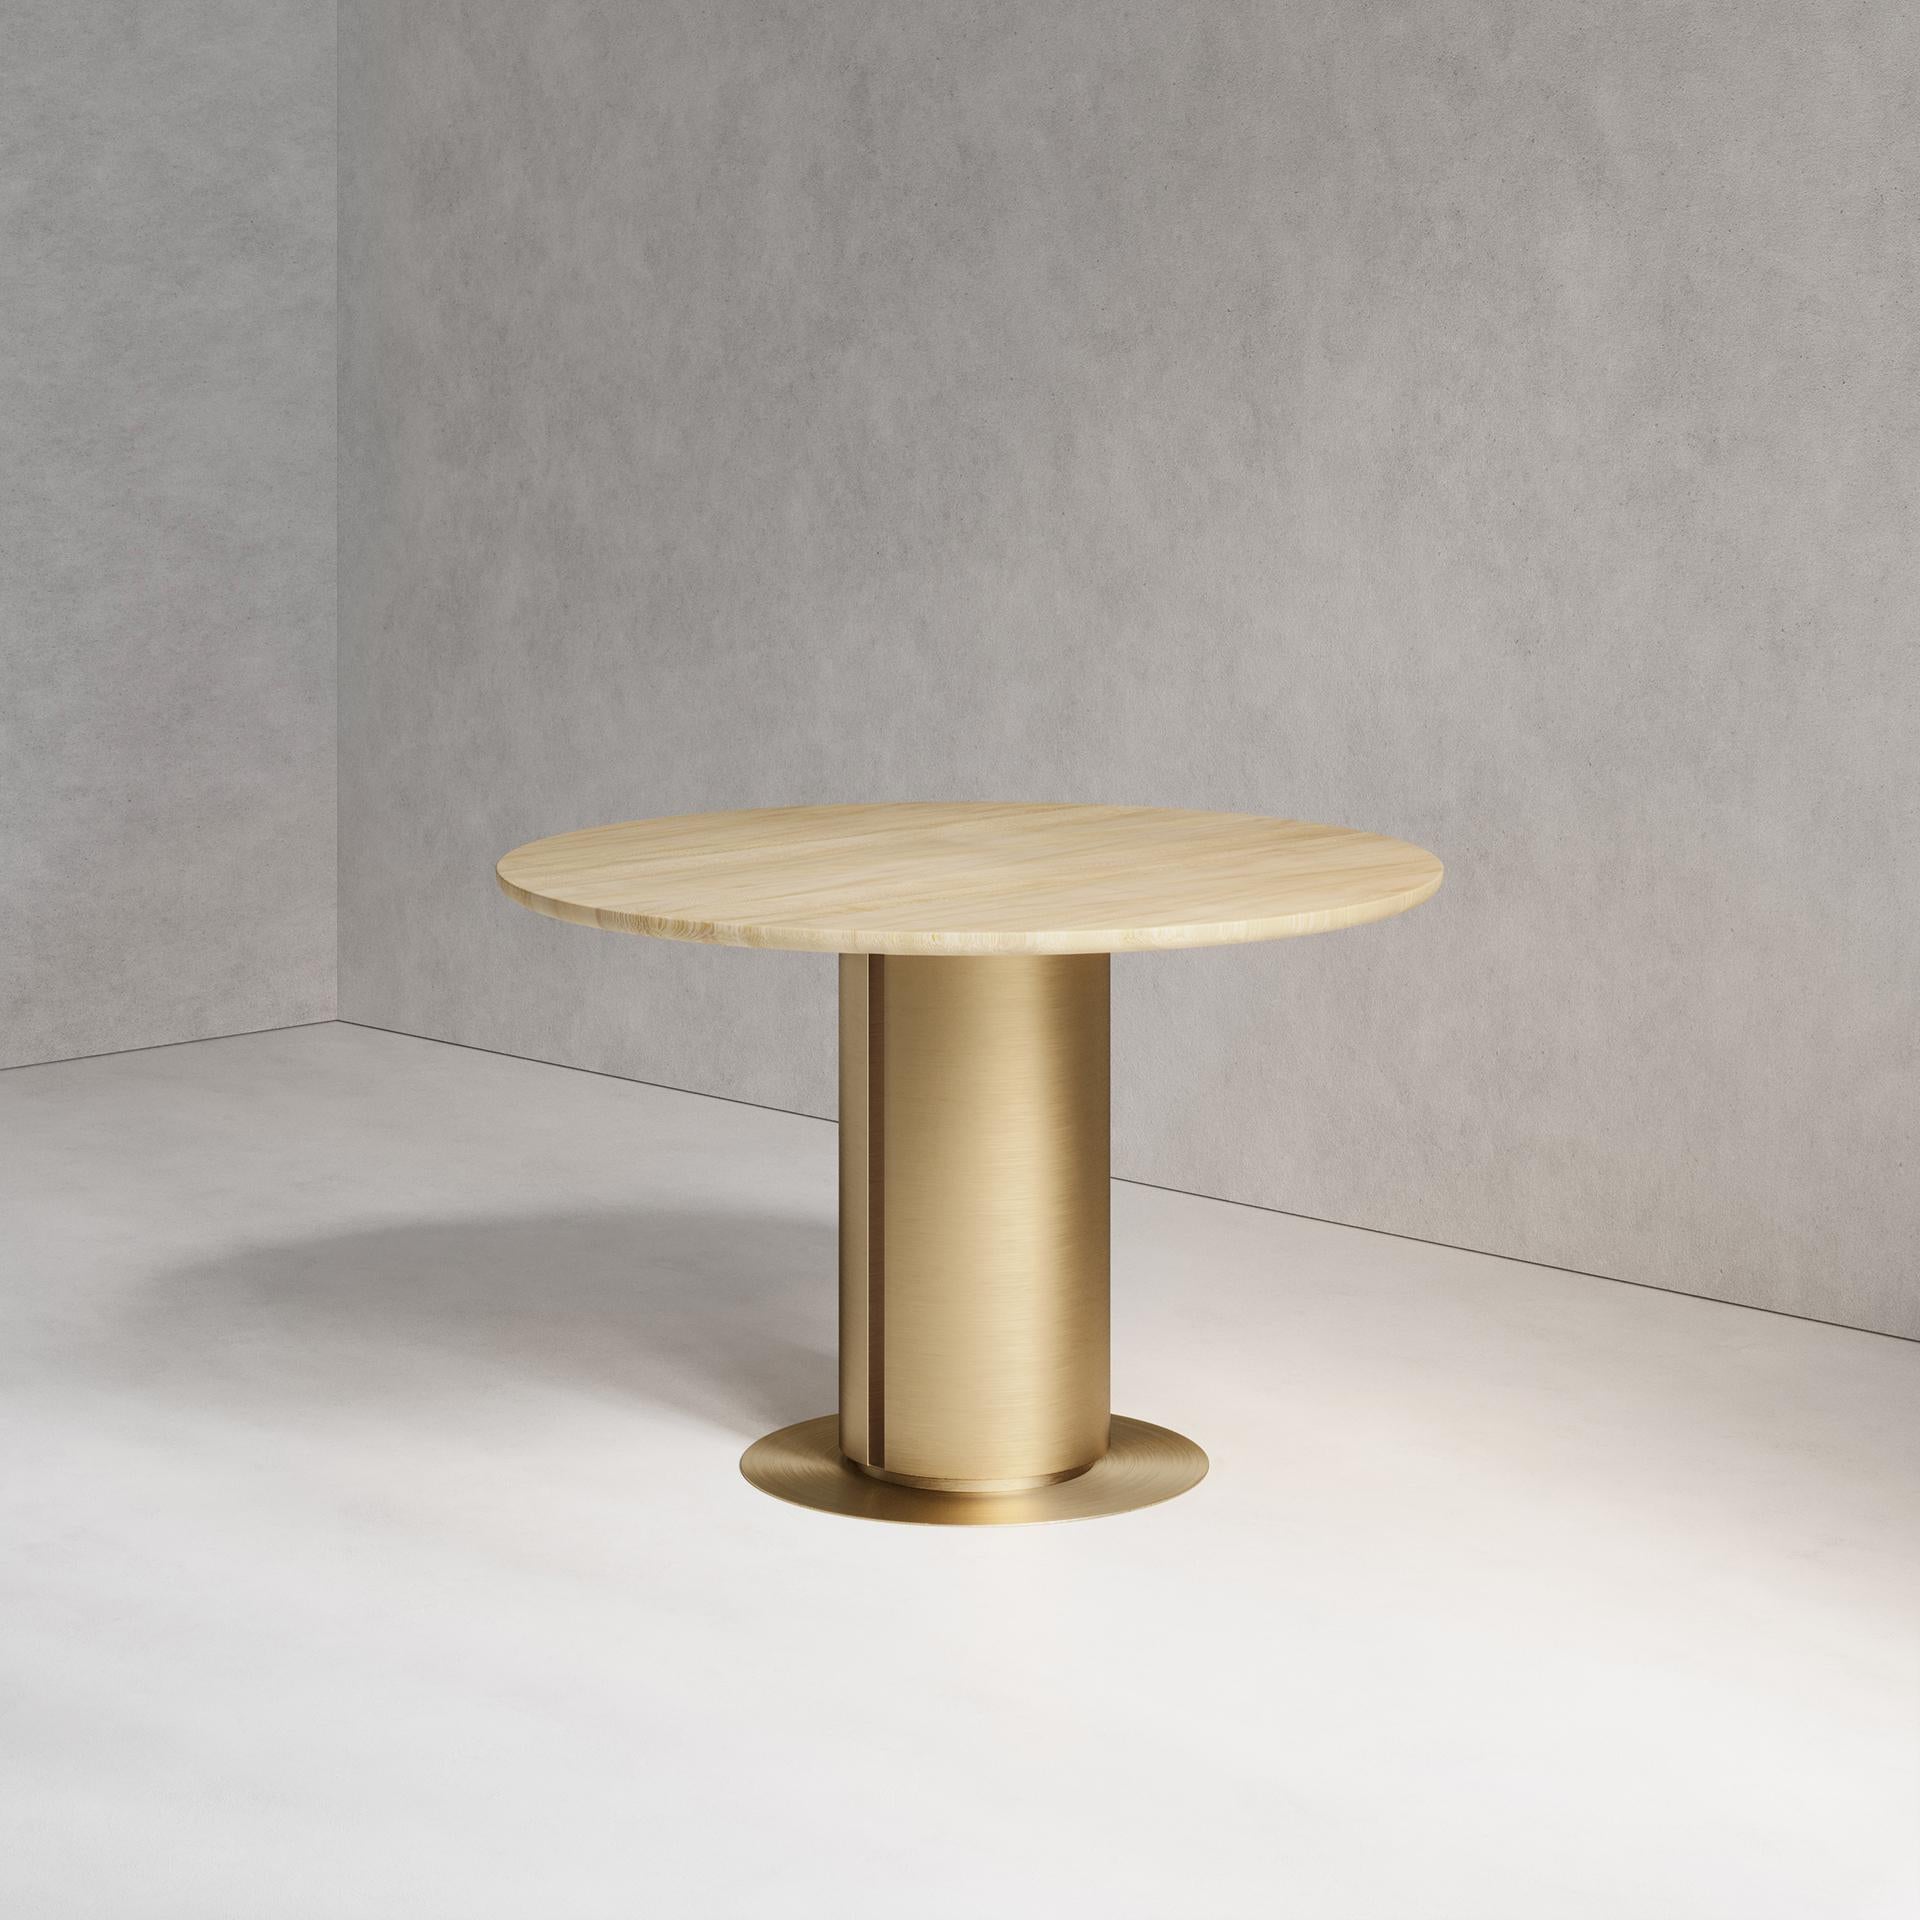 The Sol Dining Table combines both brass and wood. Using hand-spun brass, Solid Sycamore and Sycamore veneer, this piece plays with both material properties and artisan finishes. Handmade in London.

Dimensions:
Dia. 120cm (47.24”) Height 76cm